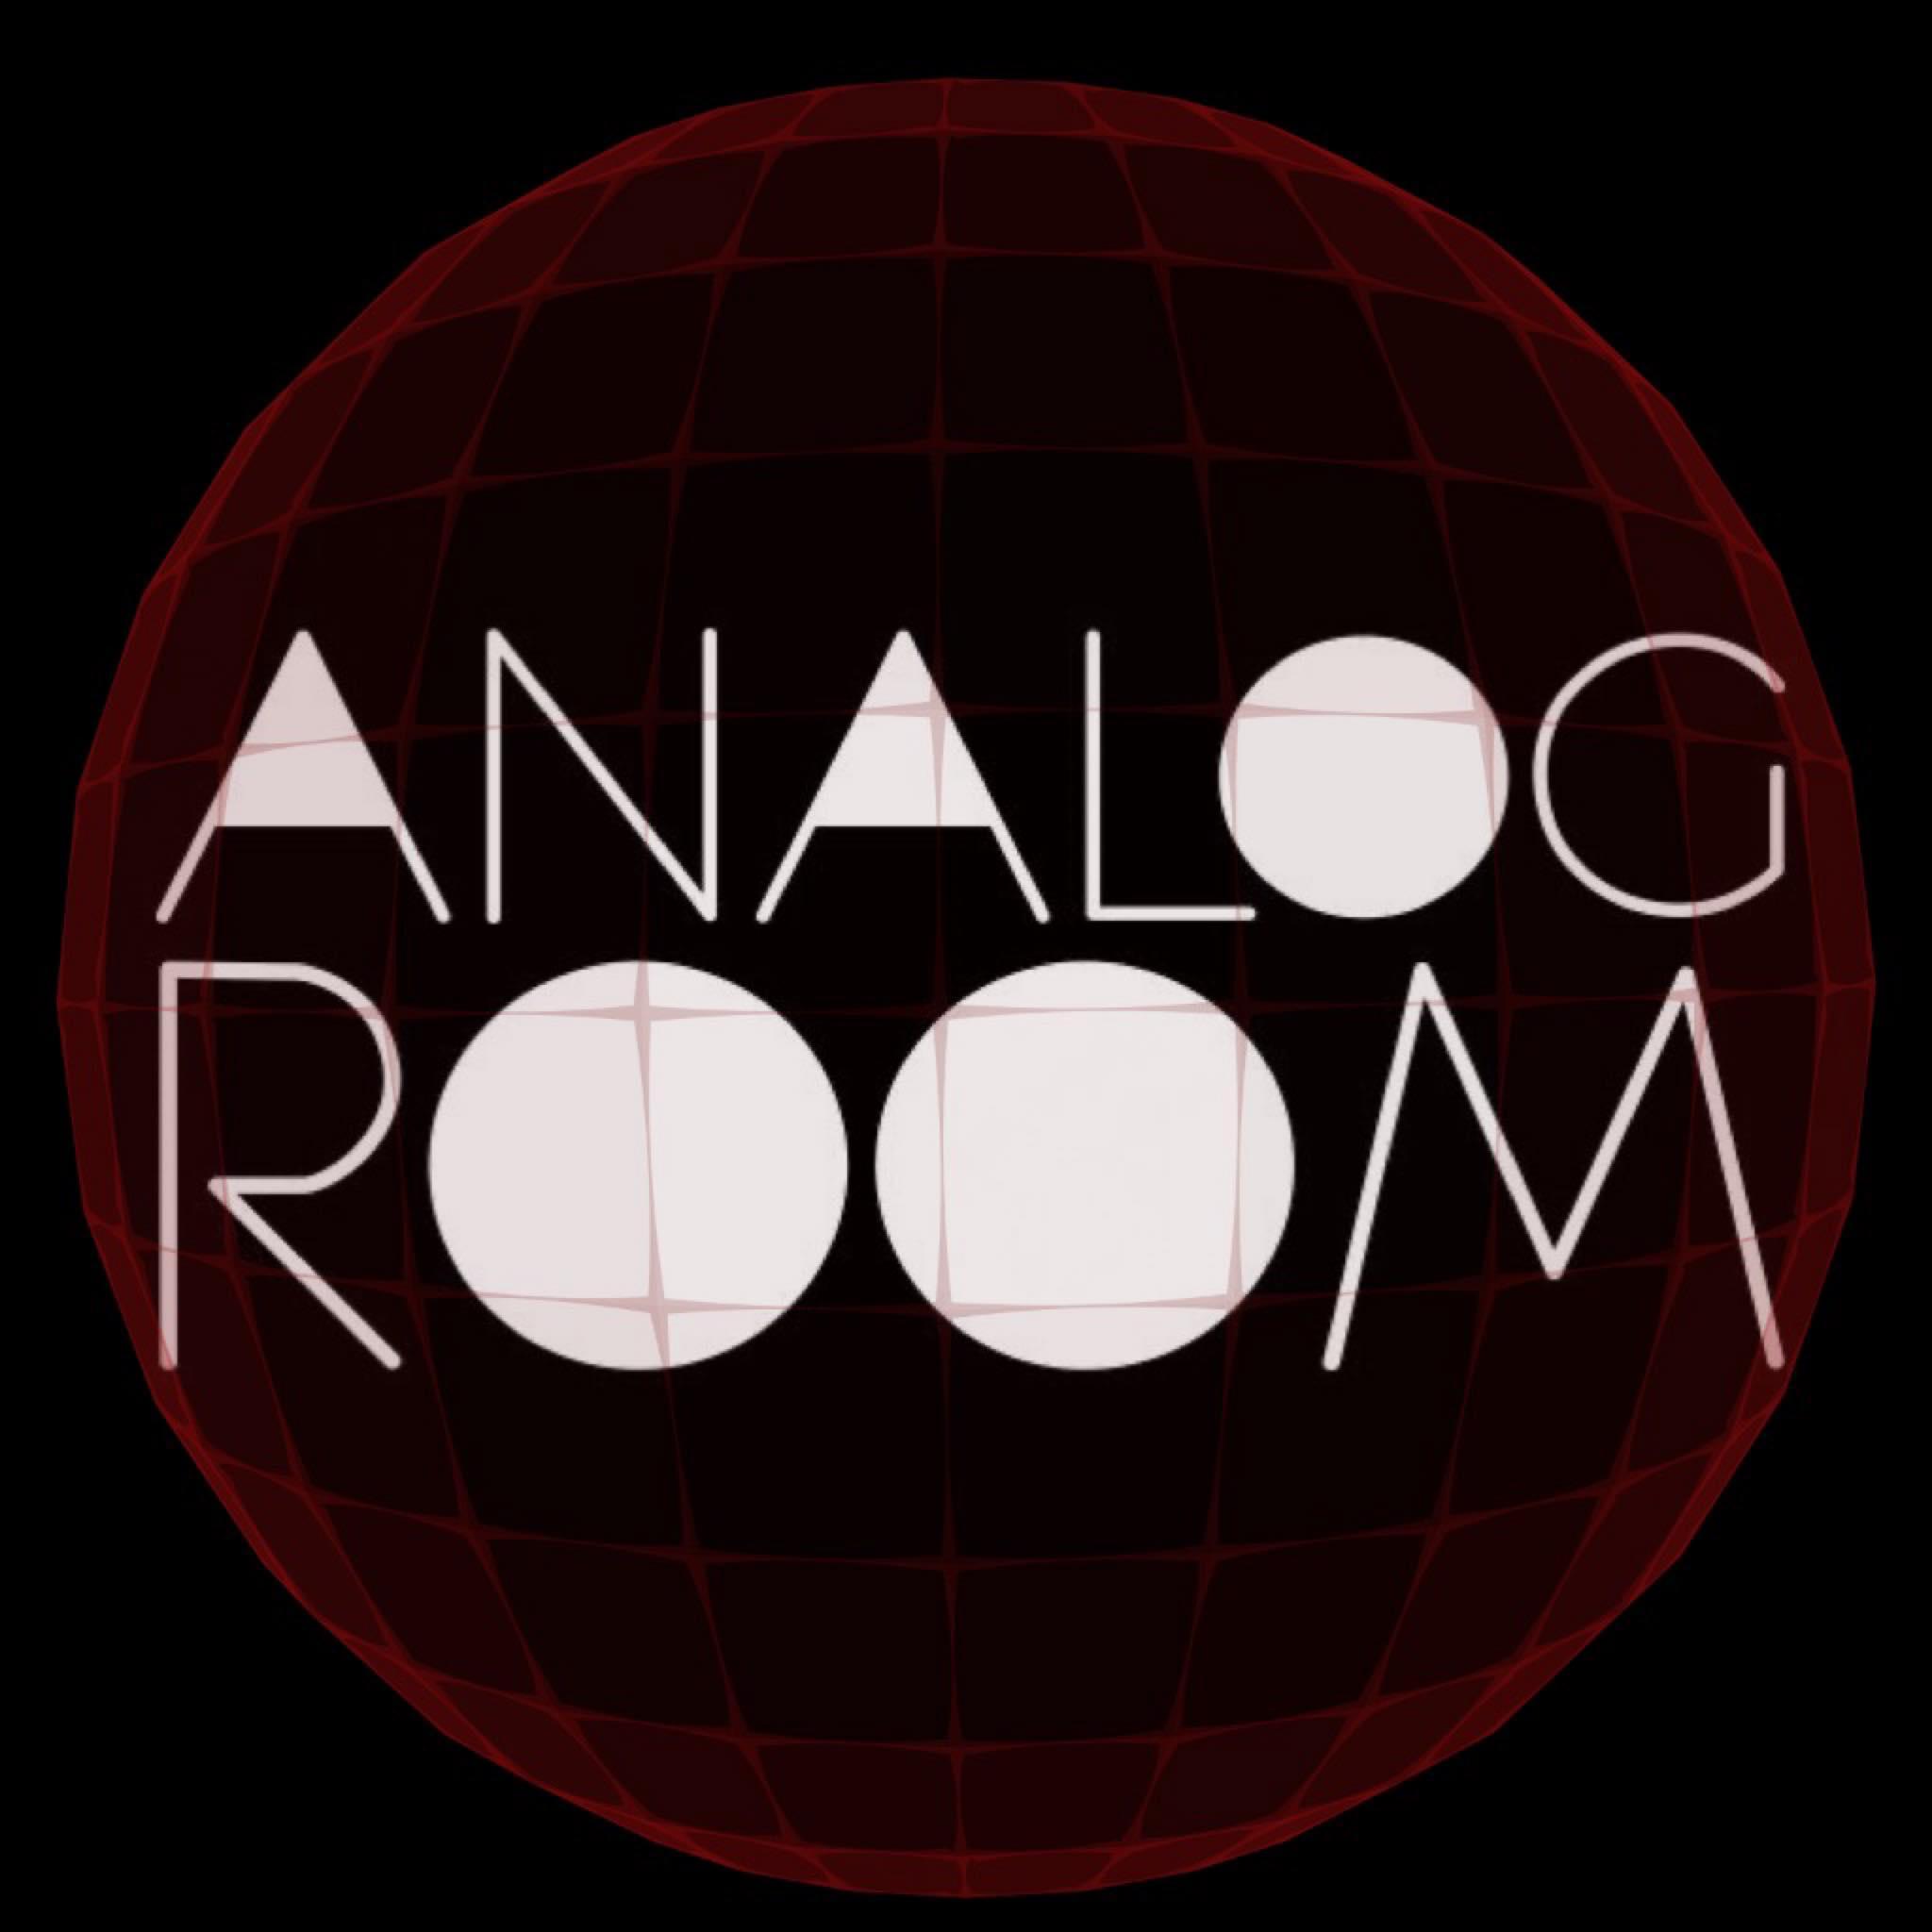 Analog Room pres. Techfui Release Party